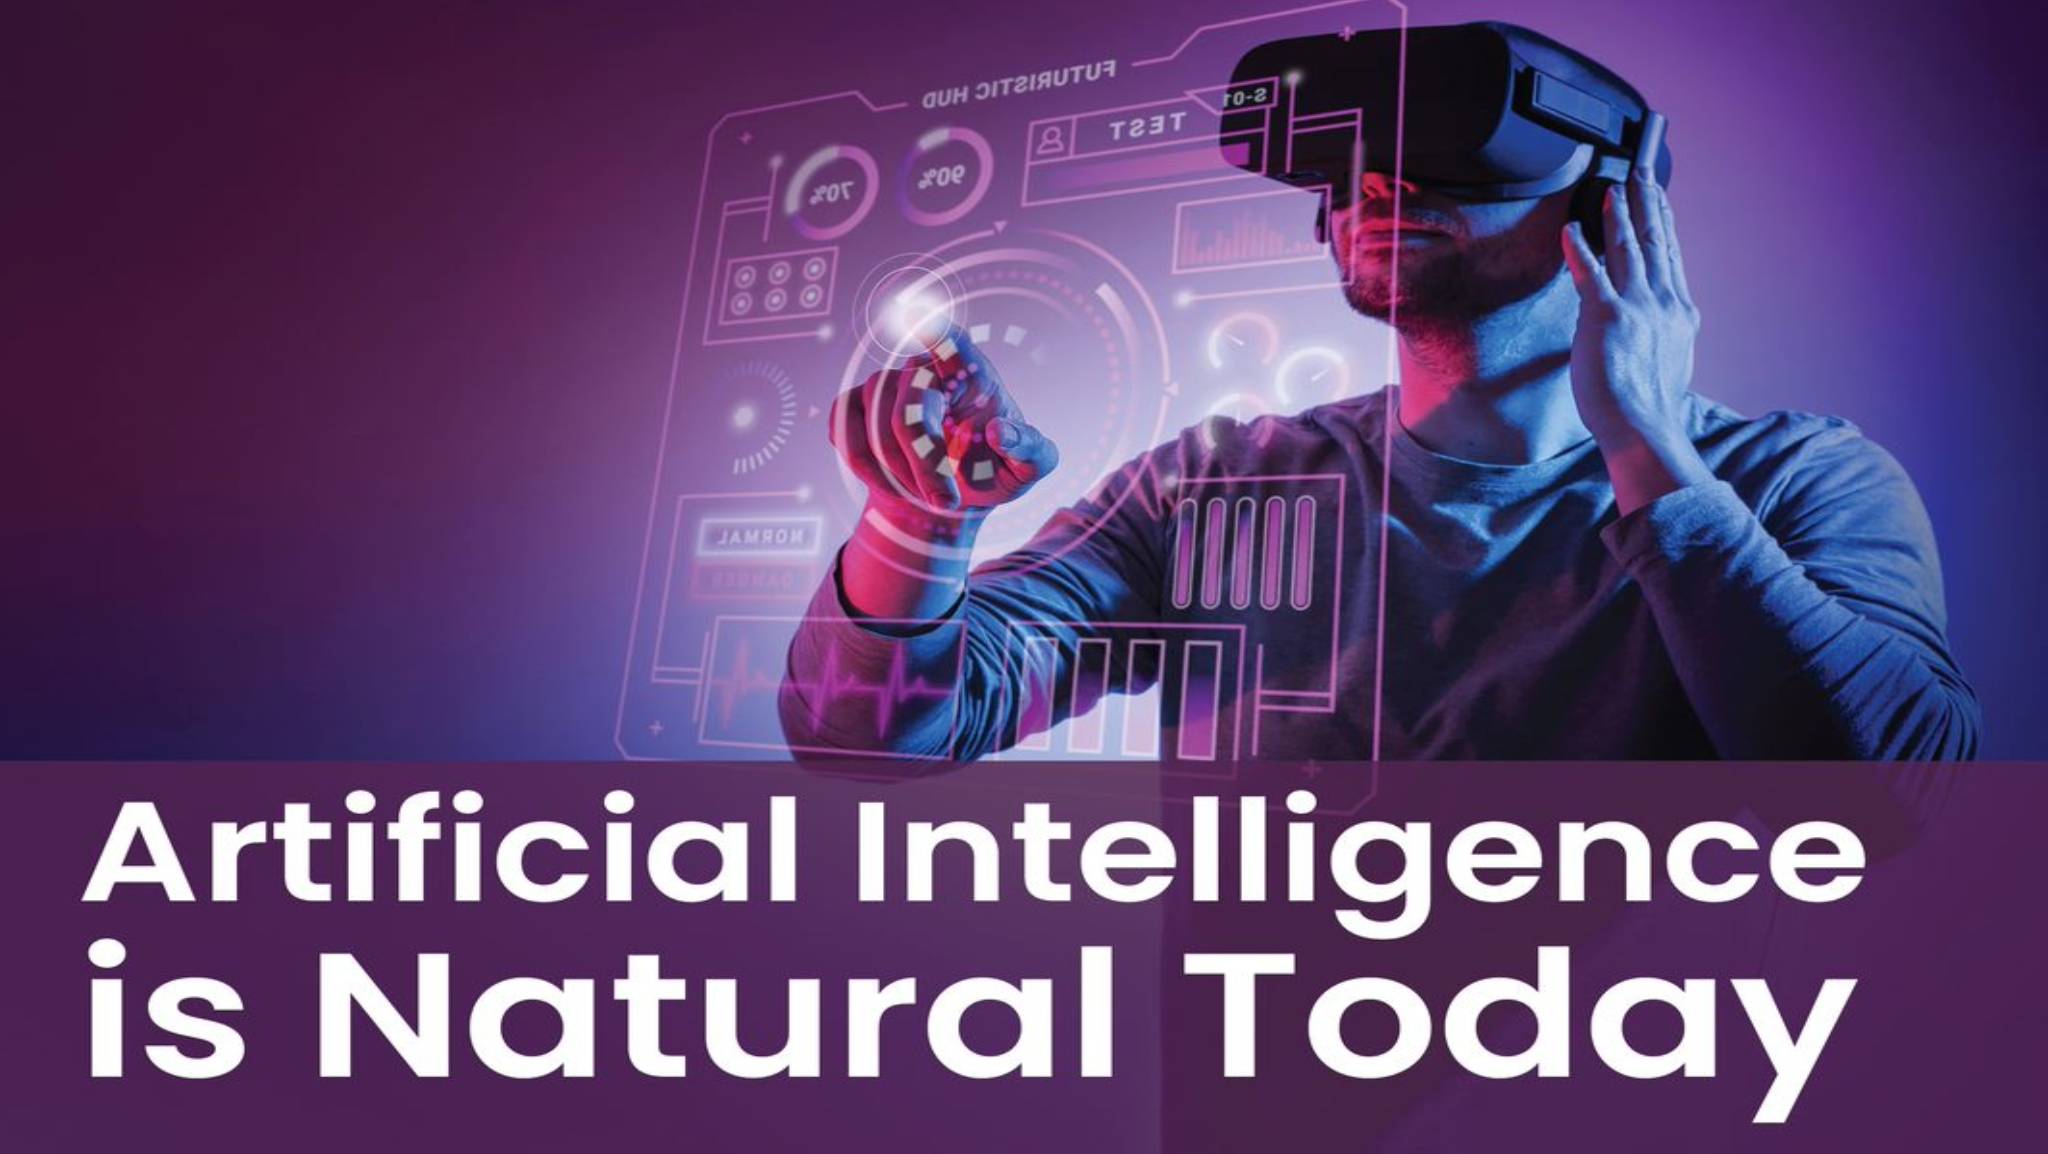 Artificial Intelligence is Natural Today